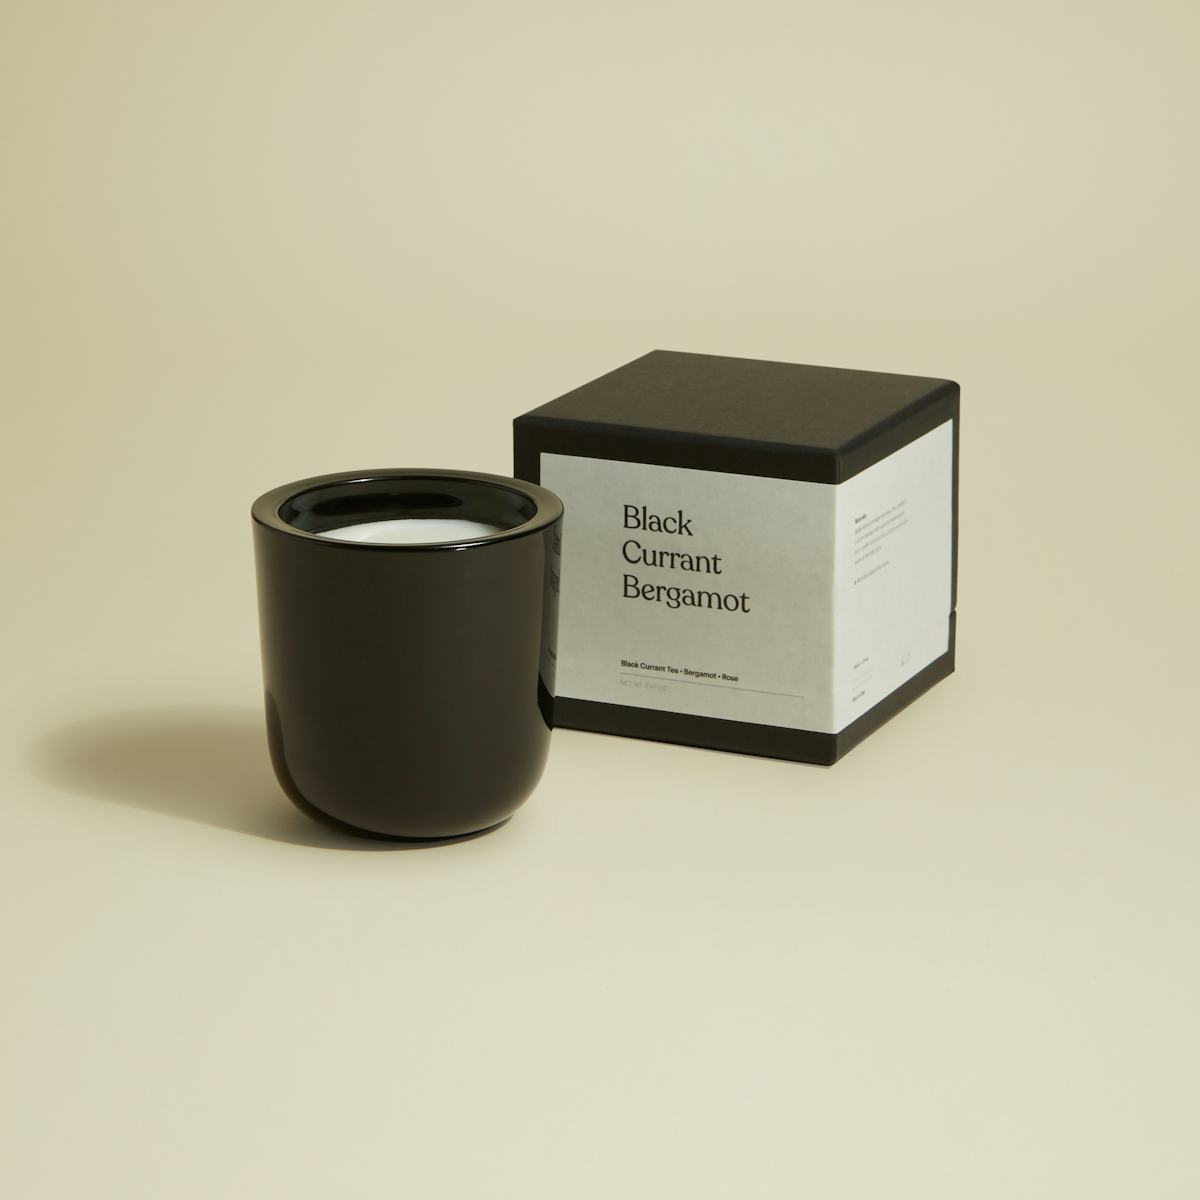 Black Currant Geranium Scented Candle_4x5_FrontwithBox.jpg